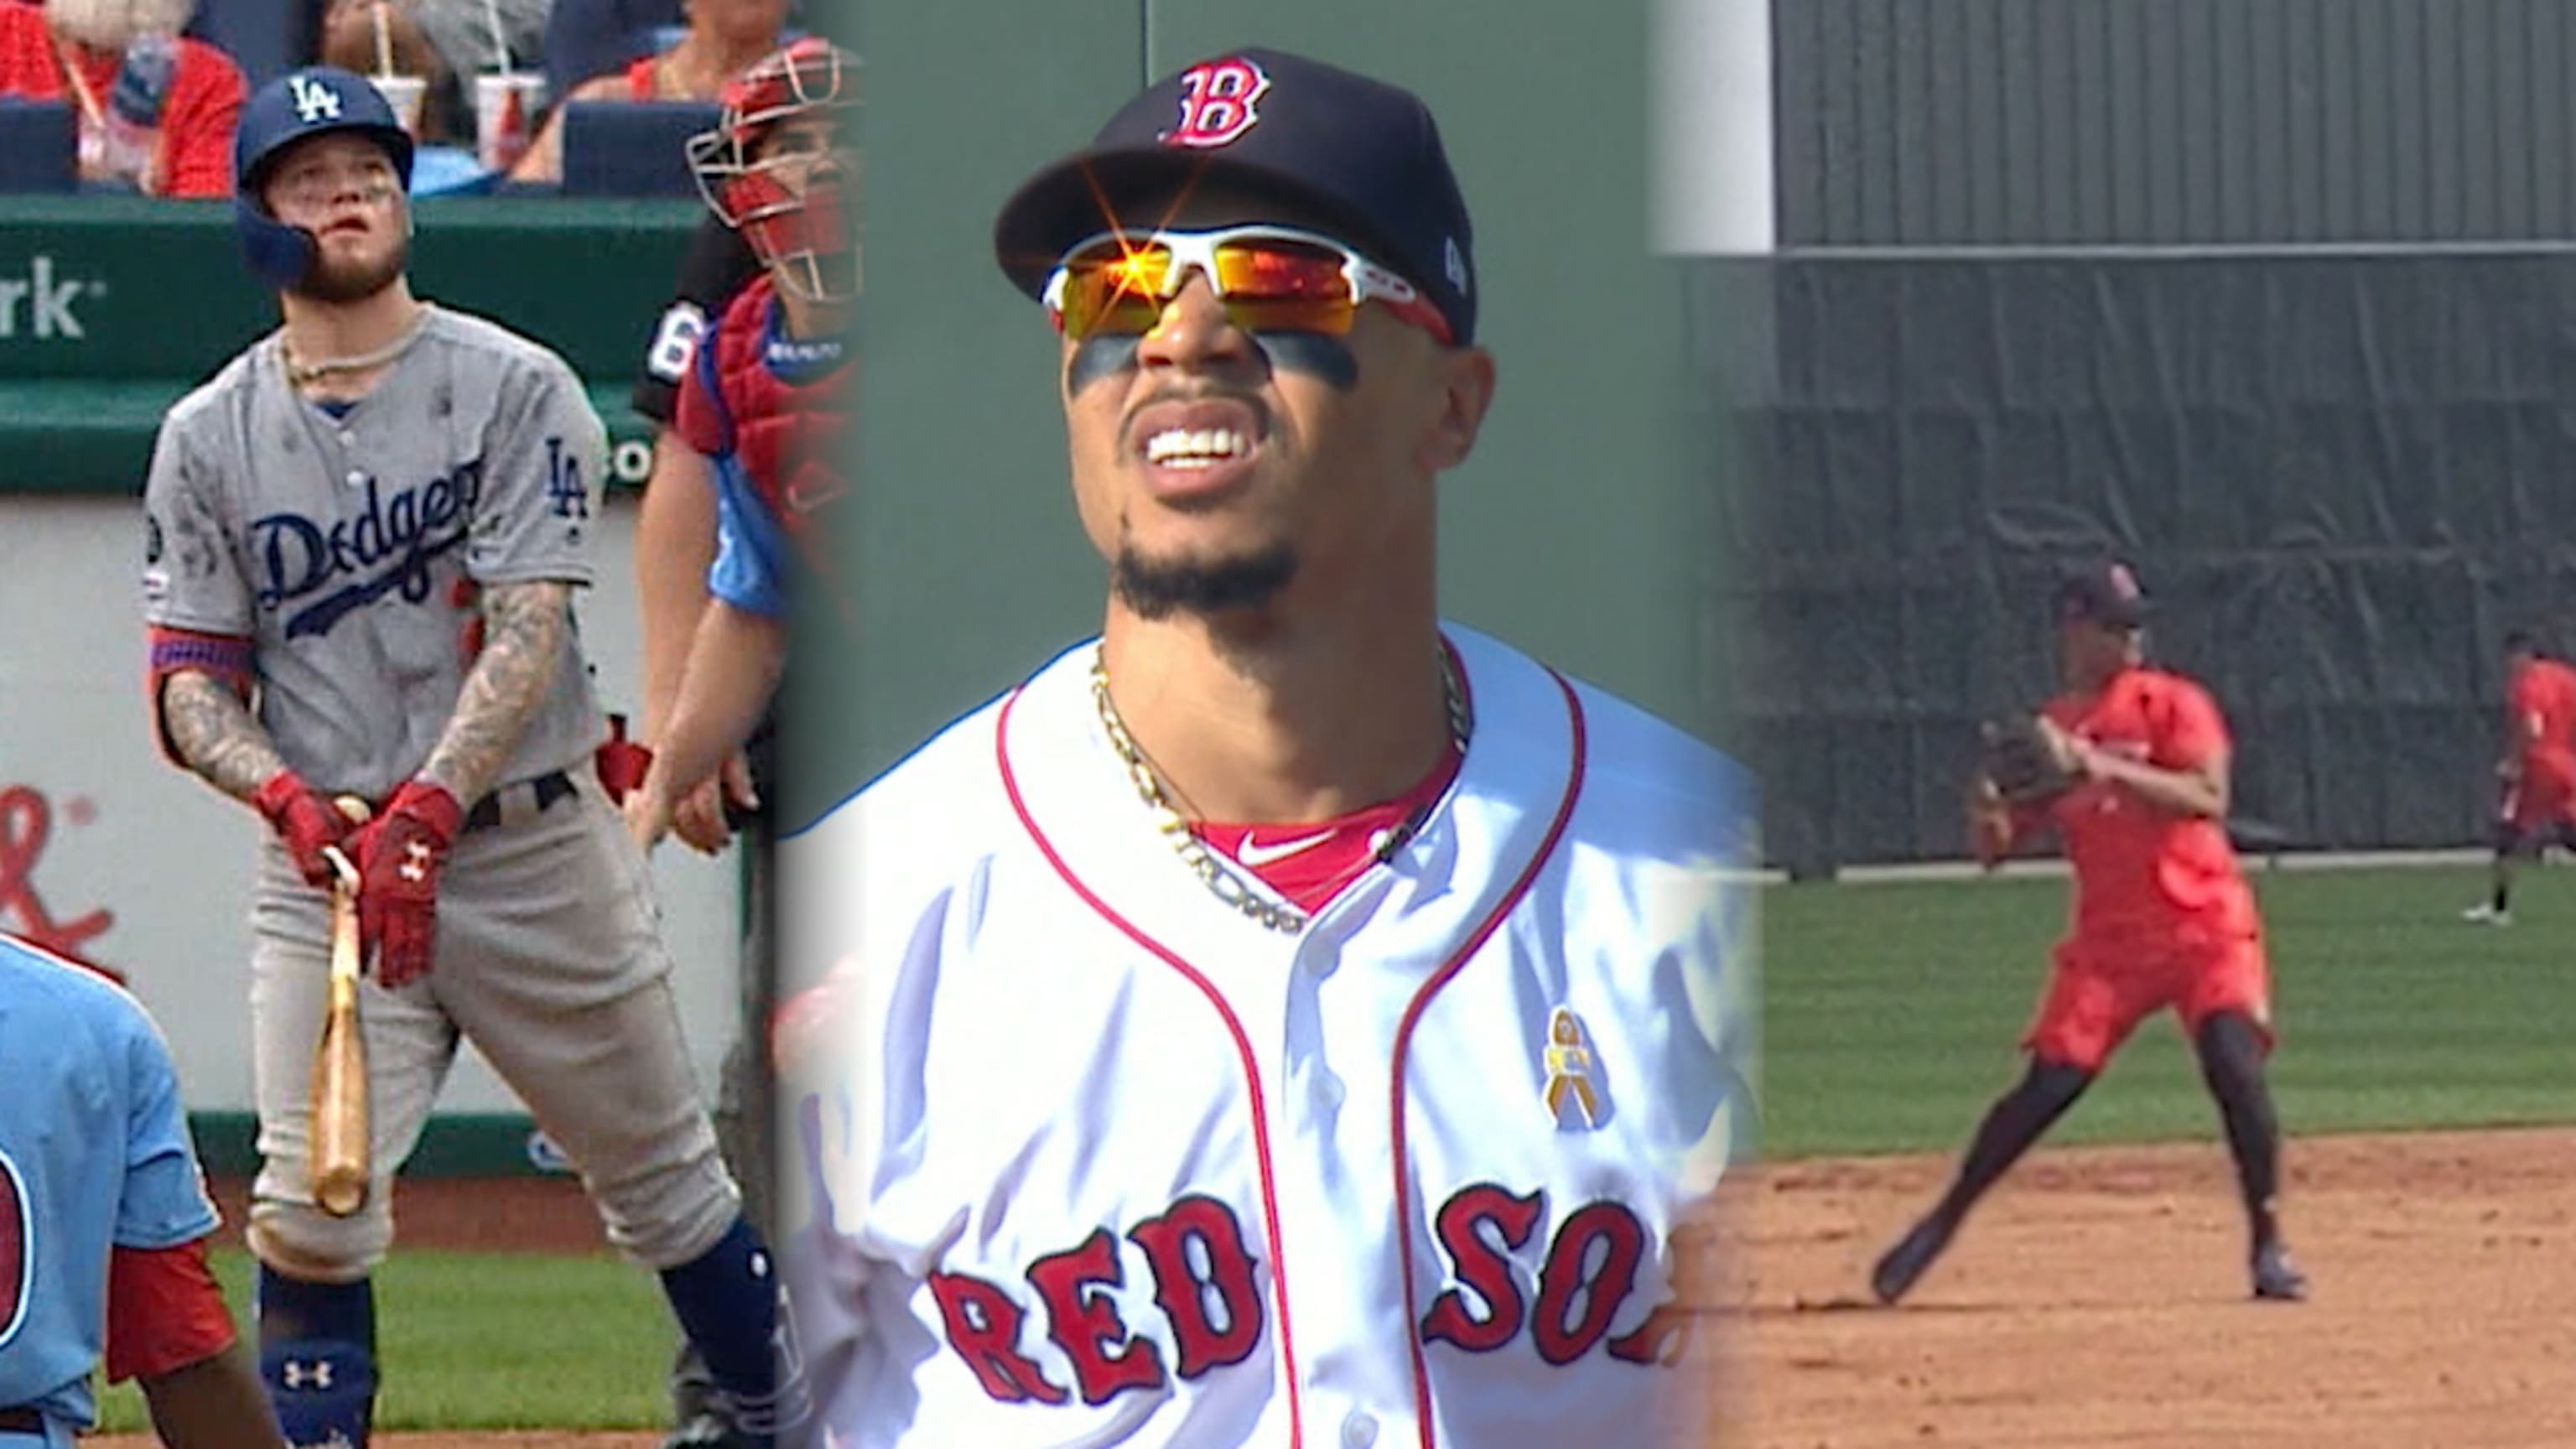 Mookie Betts's return is still just part of the Red Sox story